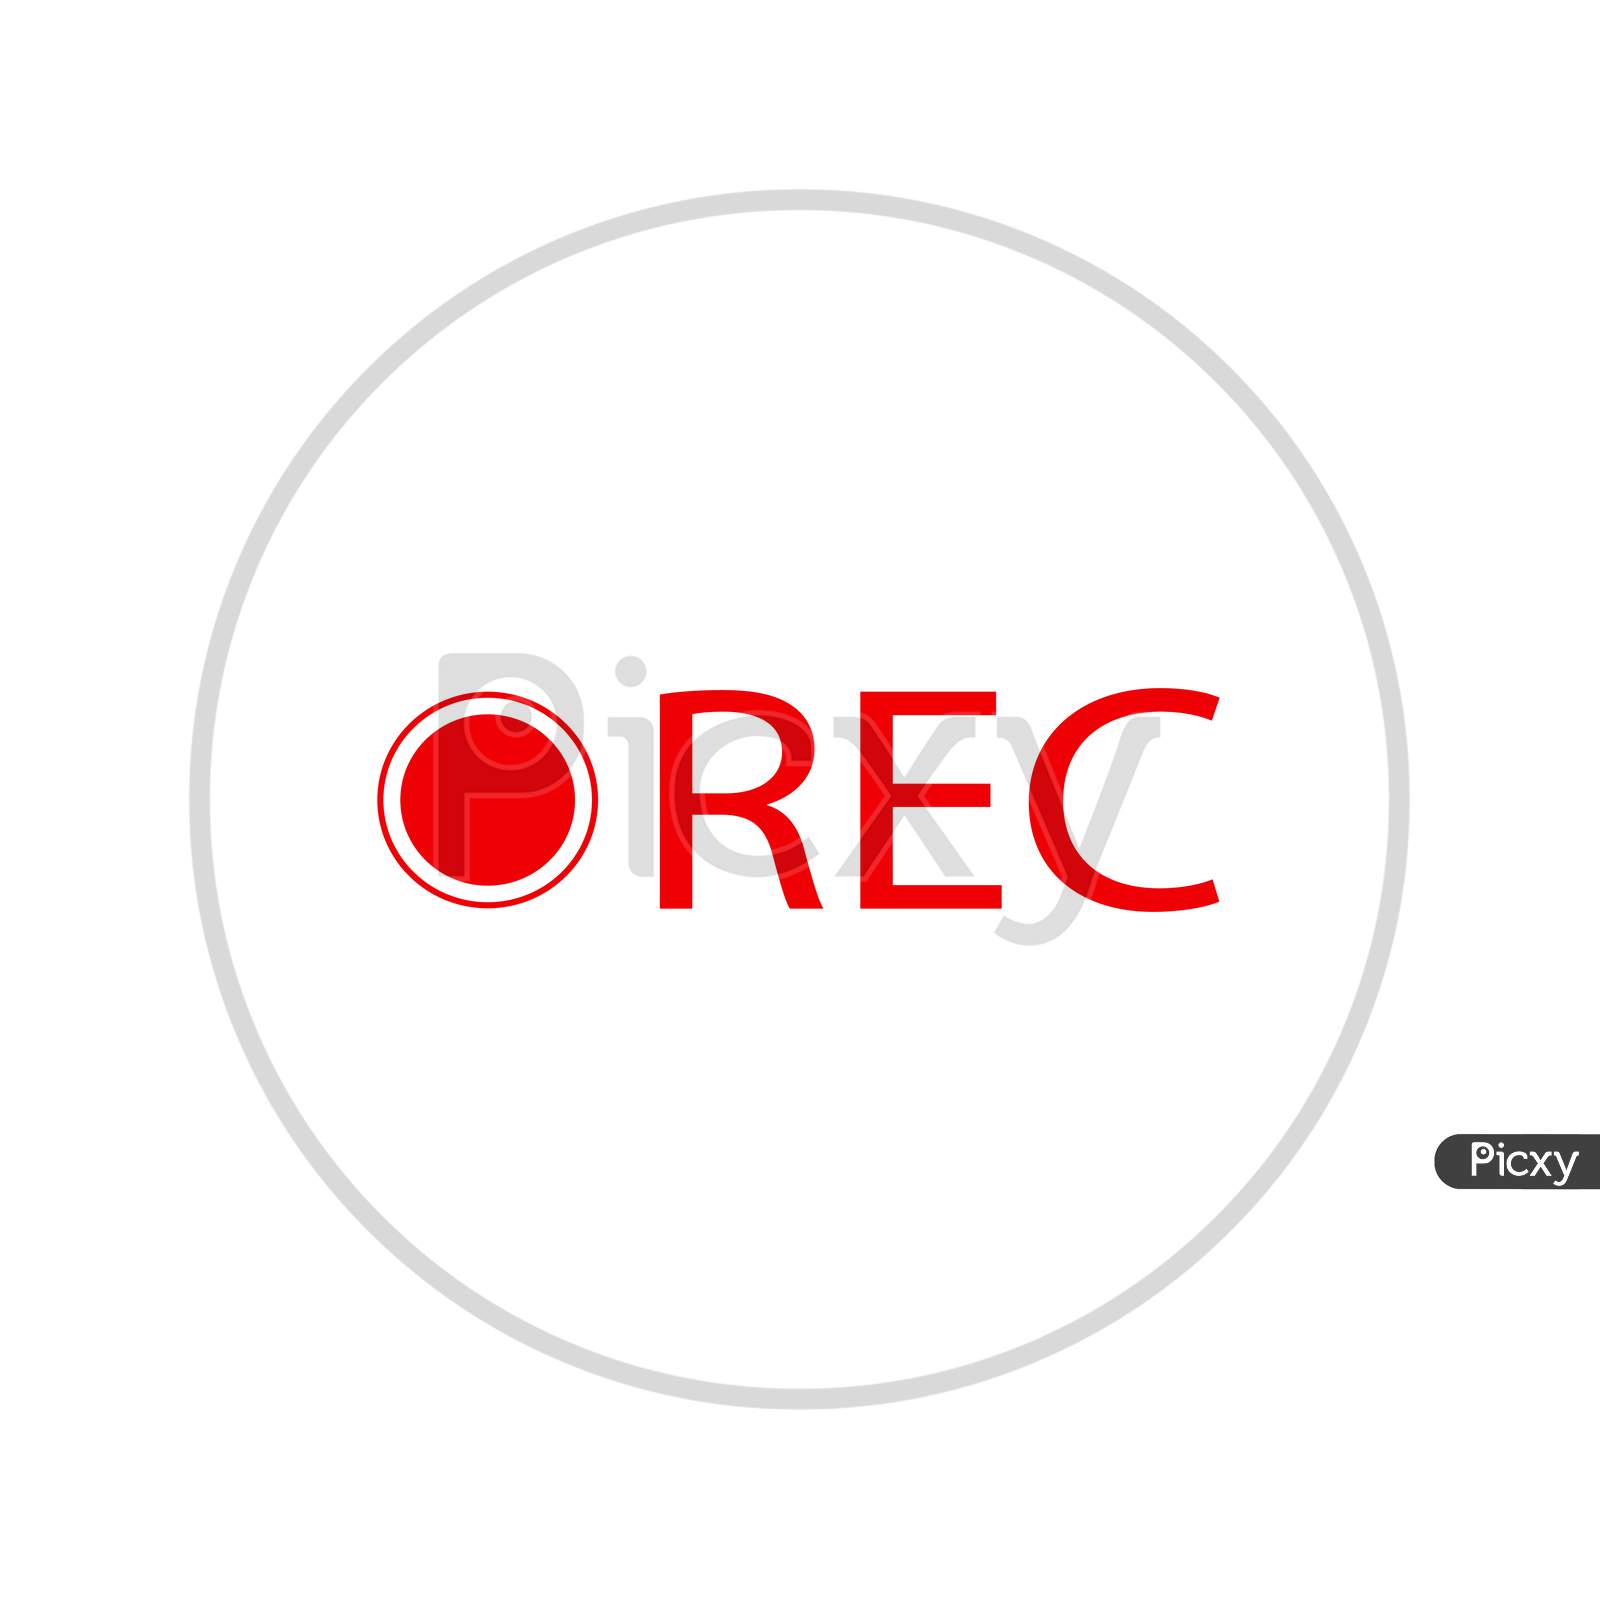 Rec / Record Button Trendy Flat Style Vector Icon. Symbol For Your Web Site Design, Logo, App Ui.